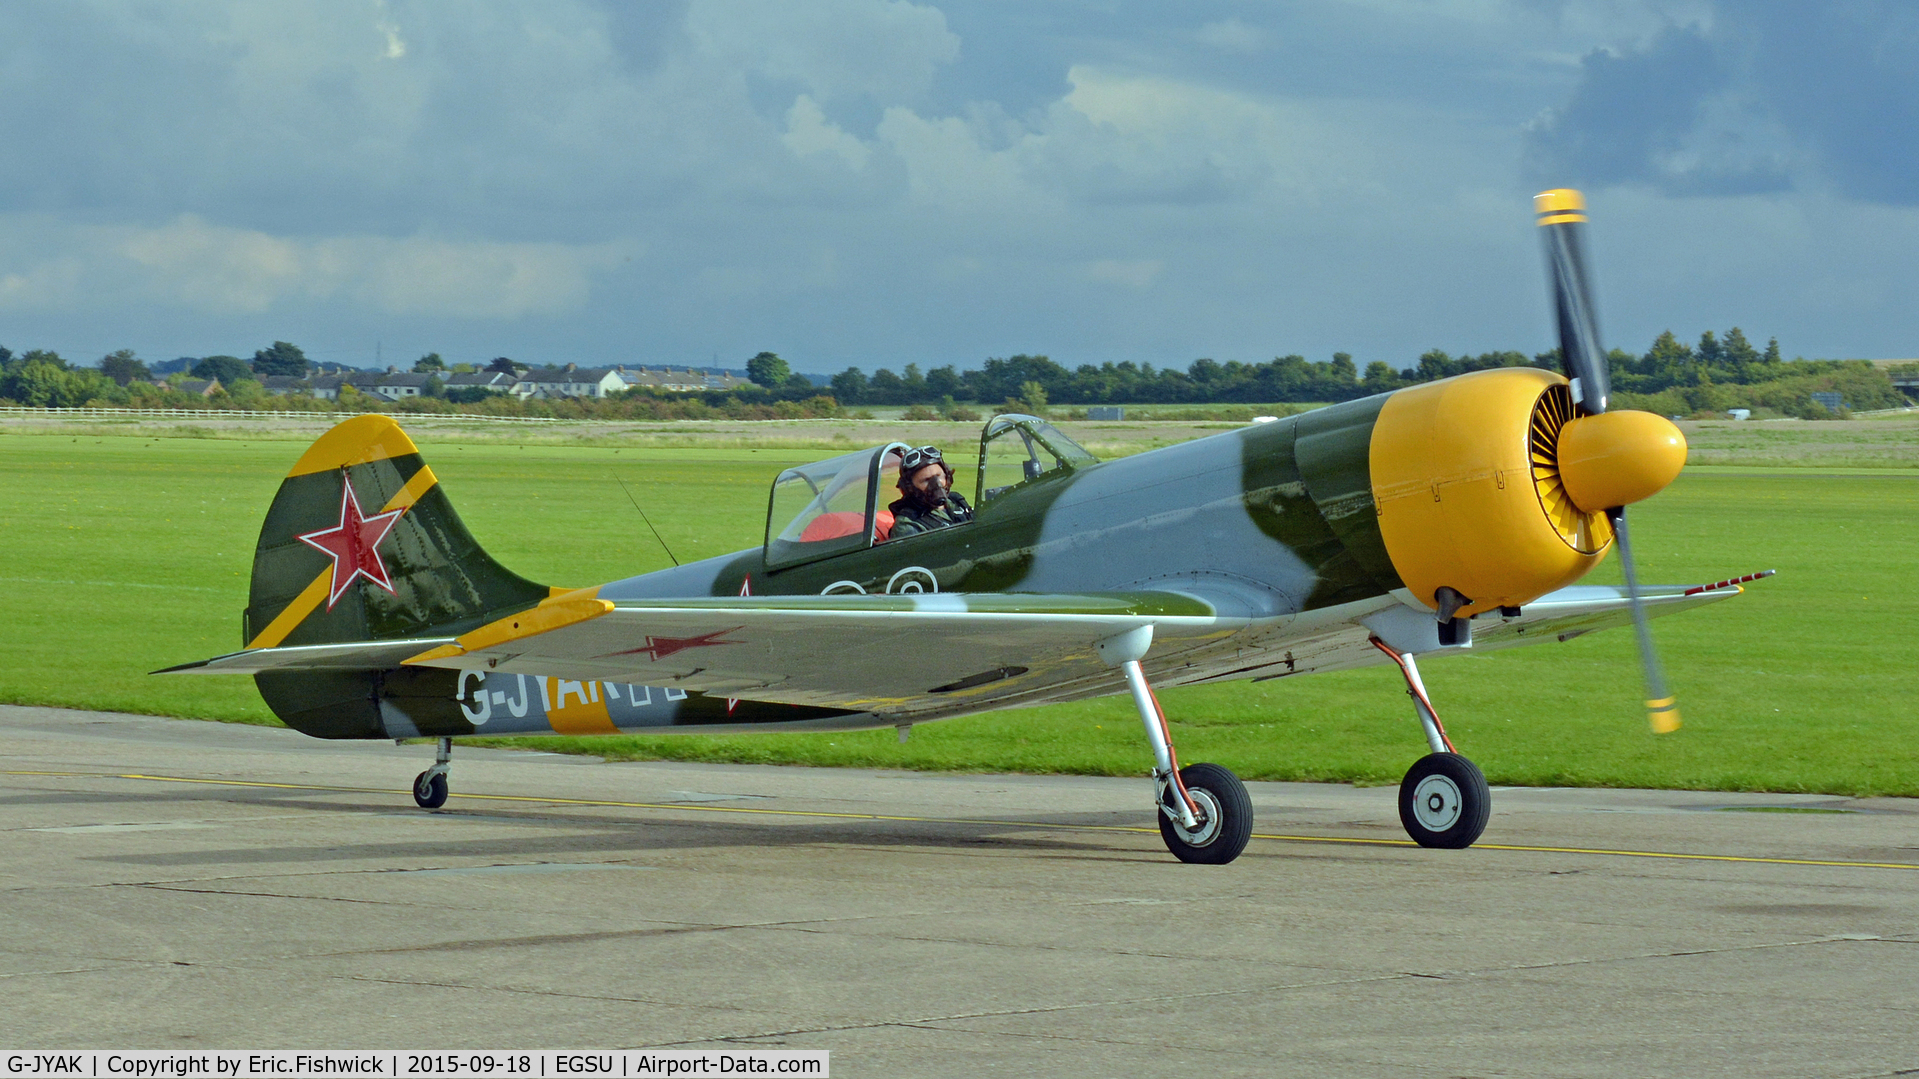 G-JYAK, 1985 Yakovlev Yak-50 C/N 853001, 3. G-JYAK arriving on the eve of The Battle of Britain (75th.) Anniversary Air Show, Sept. 2015.